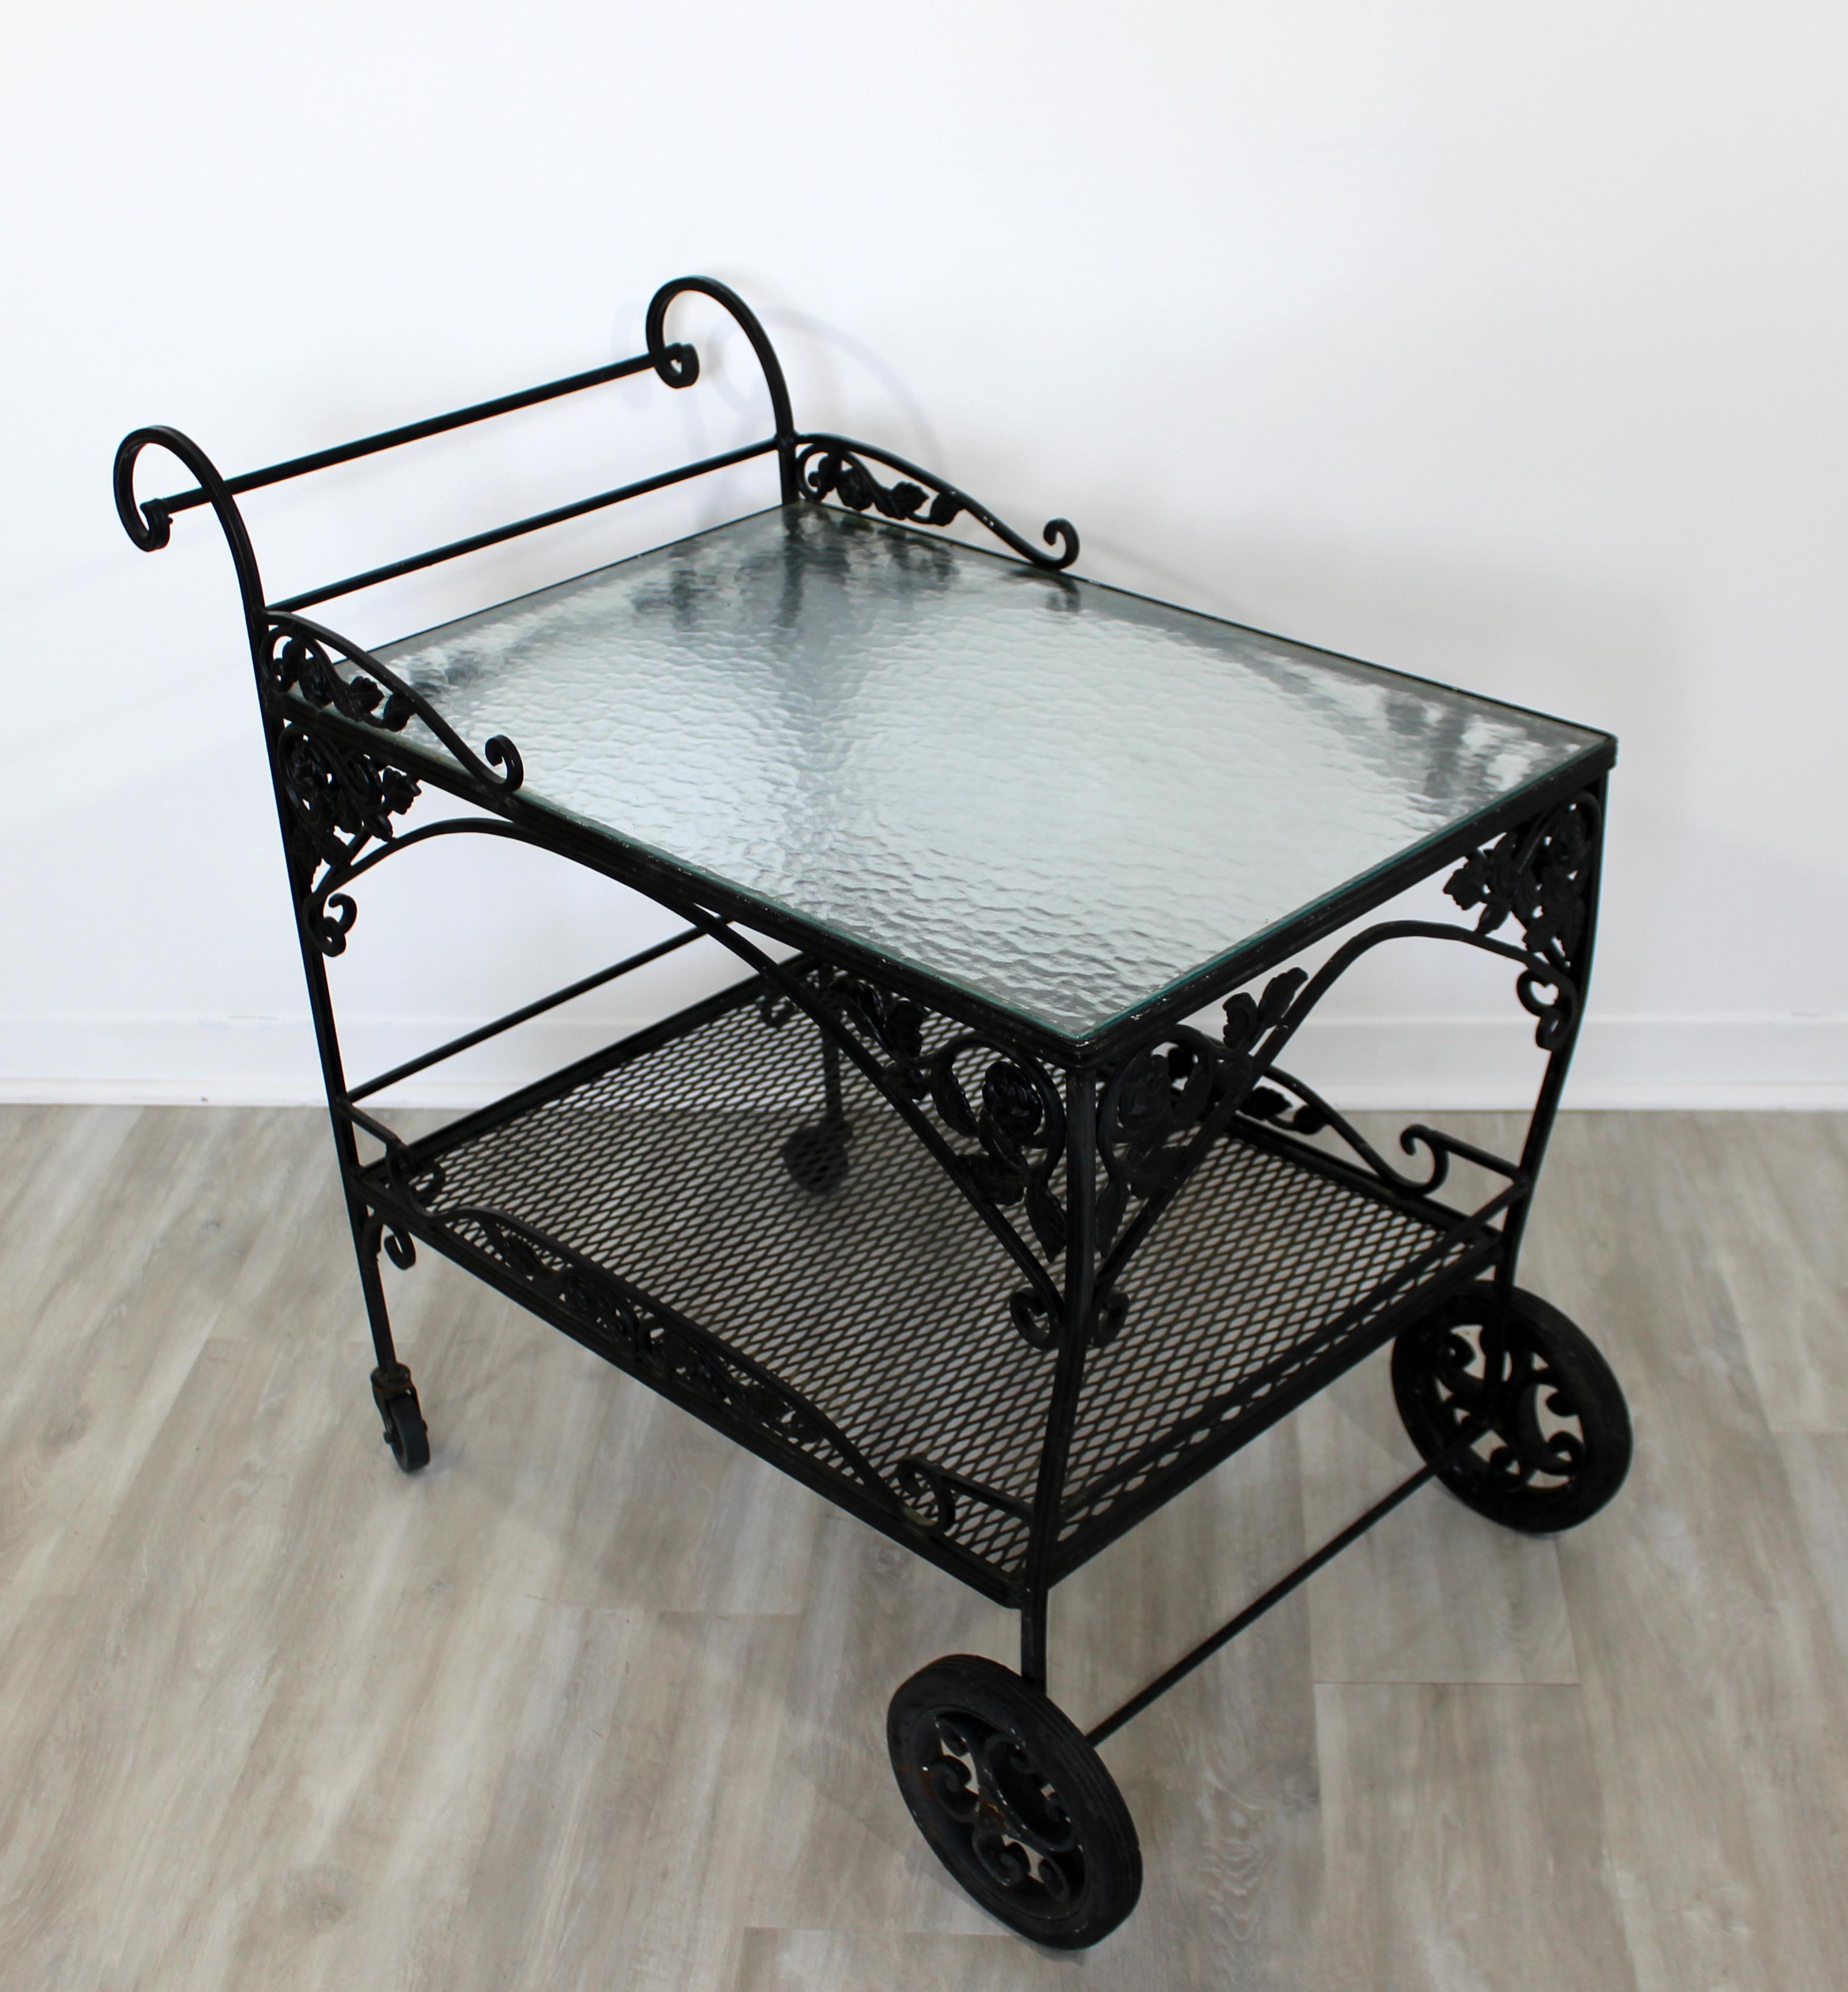 For your consideration is a stunning, wrought iron, patio bar or service cart, with a lovely floral pattern, and a glass top, circa 1960s. In very good vintage condition. The dimensions are 37